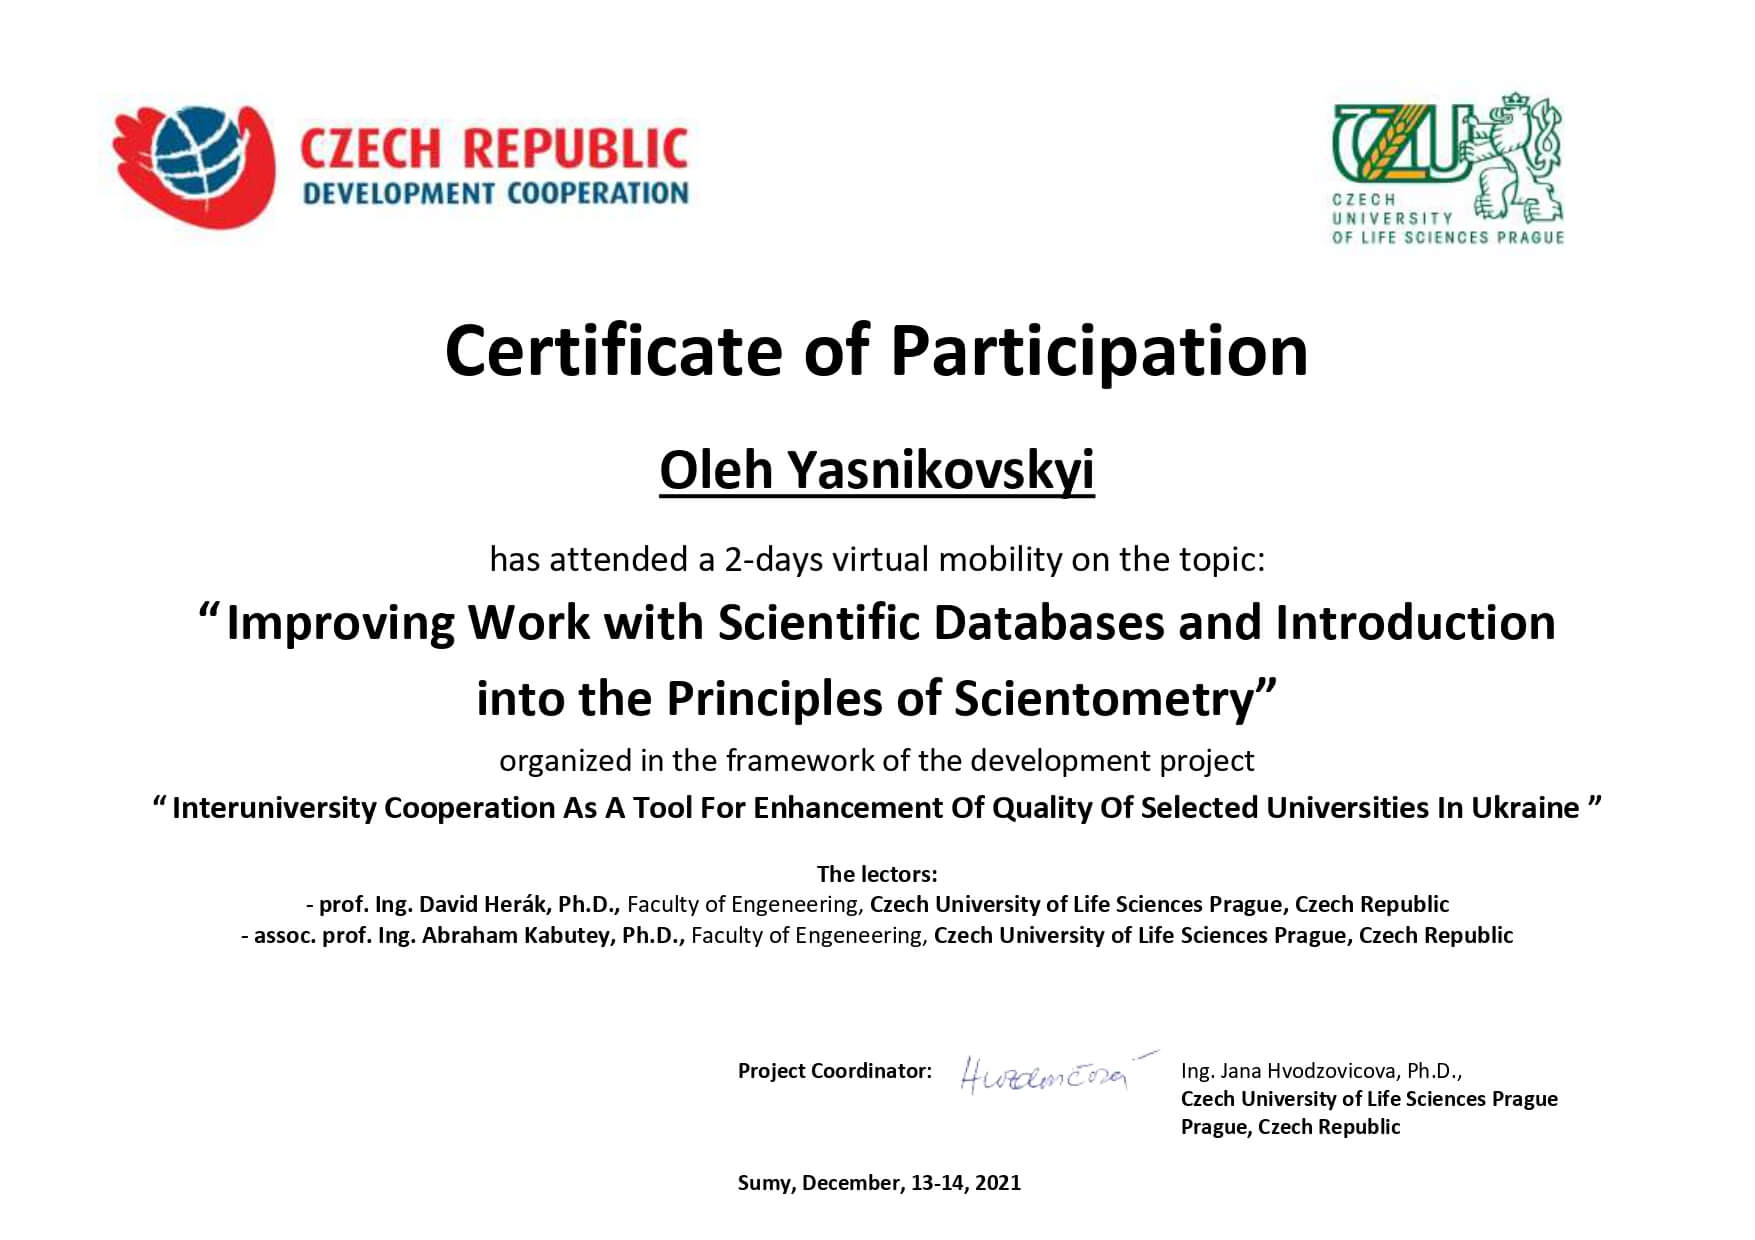 Participation in the virtual mobility of Oleg Yasnikovsky